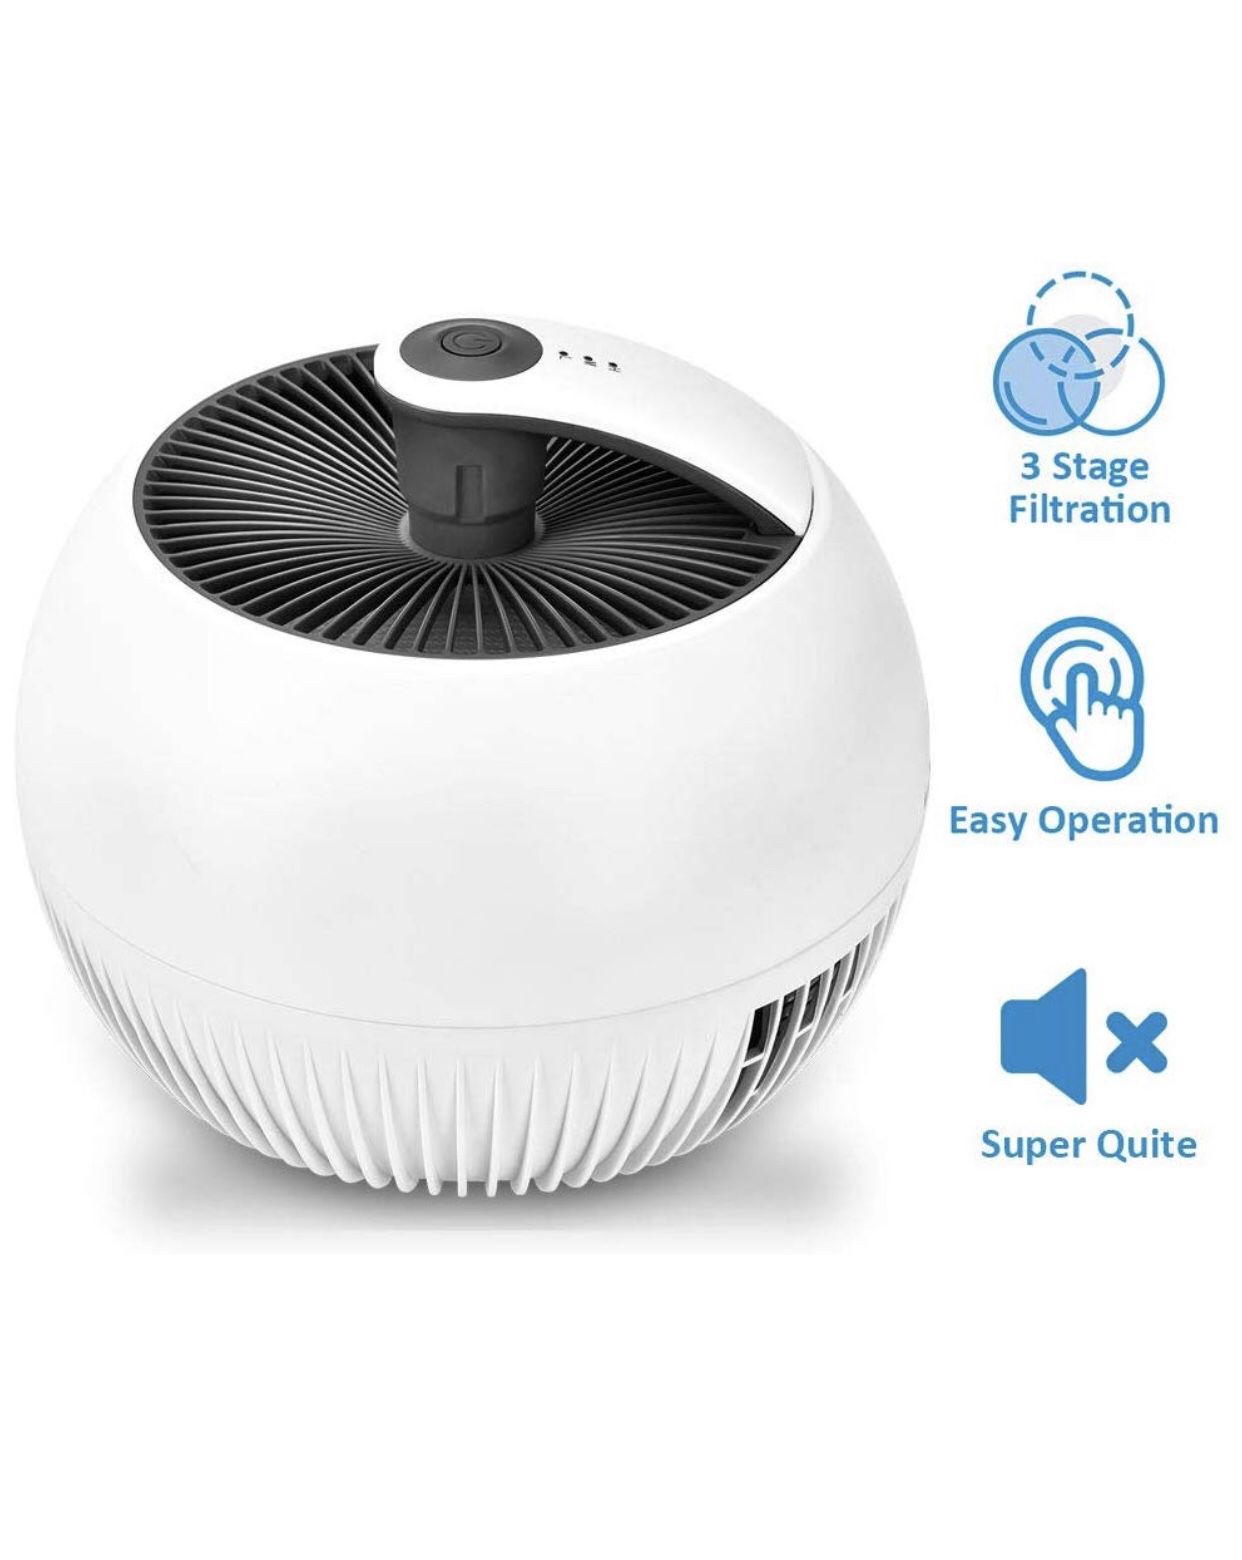 3-in-1 True HEAP Air Purifier with 3 Filtration Systems, Quiet Operation, 3 Modes, Portable Air Cleaner for Home & Office, Reduce Dust Particles, Pe